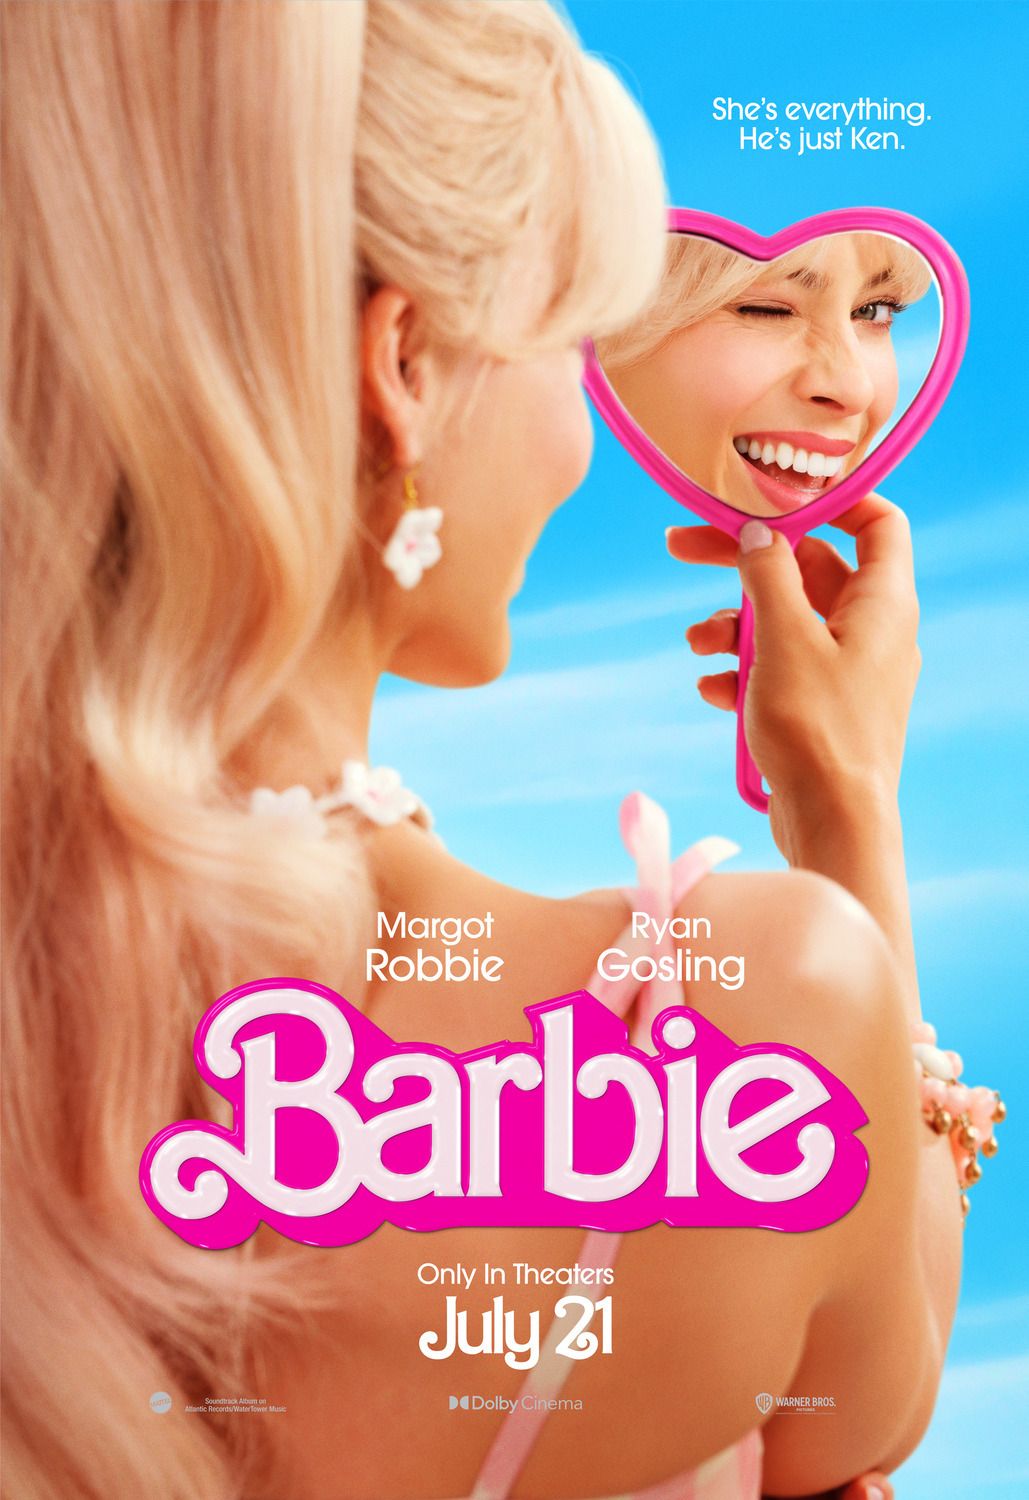 The movie poster for Barbie.